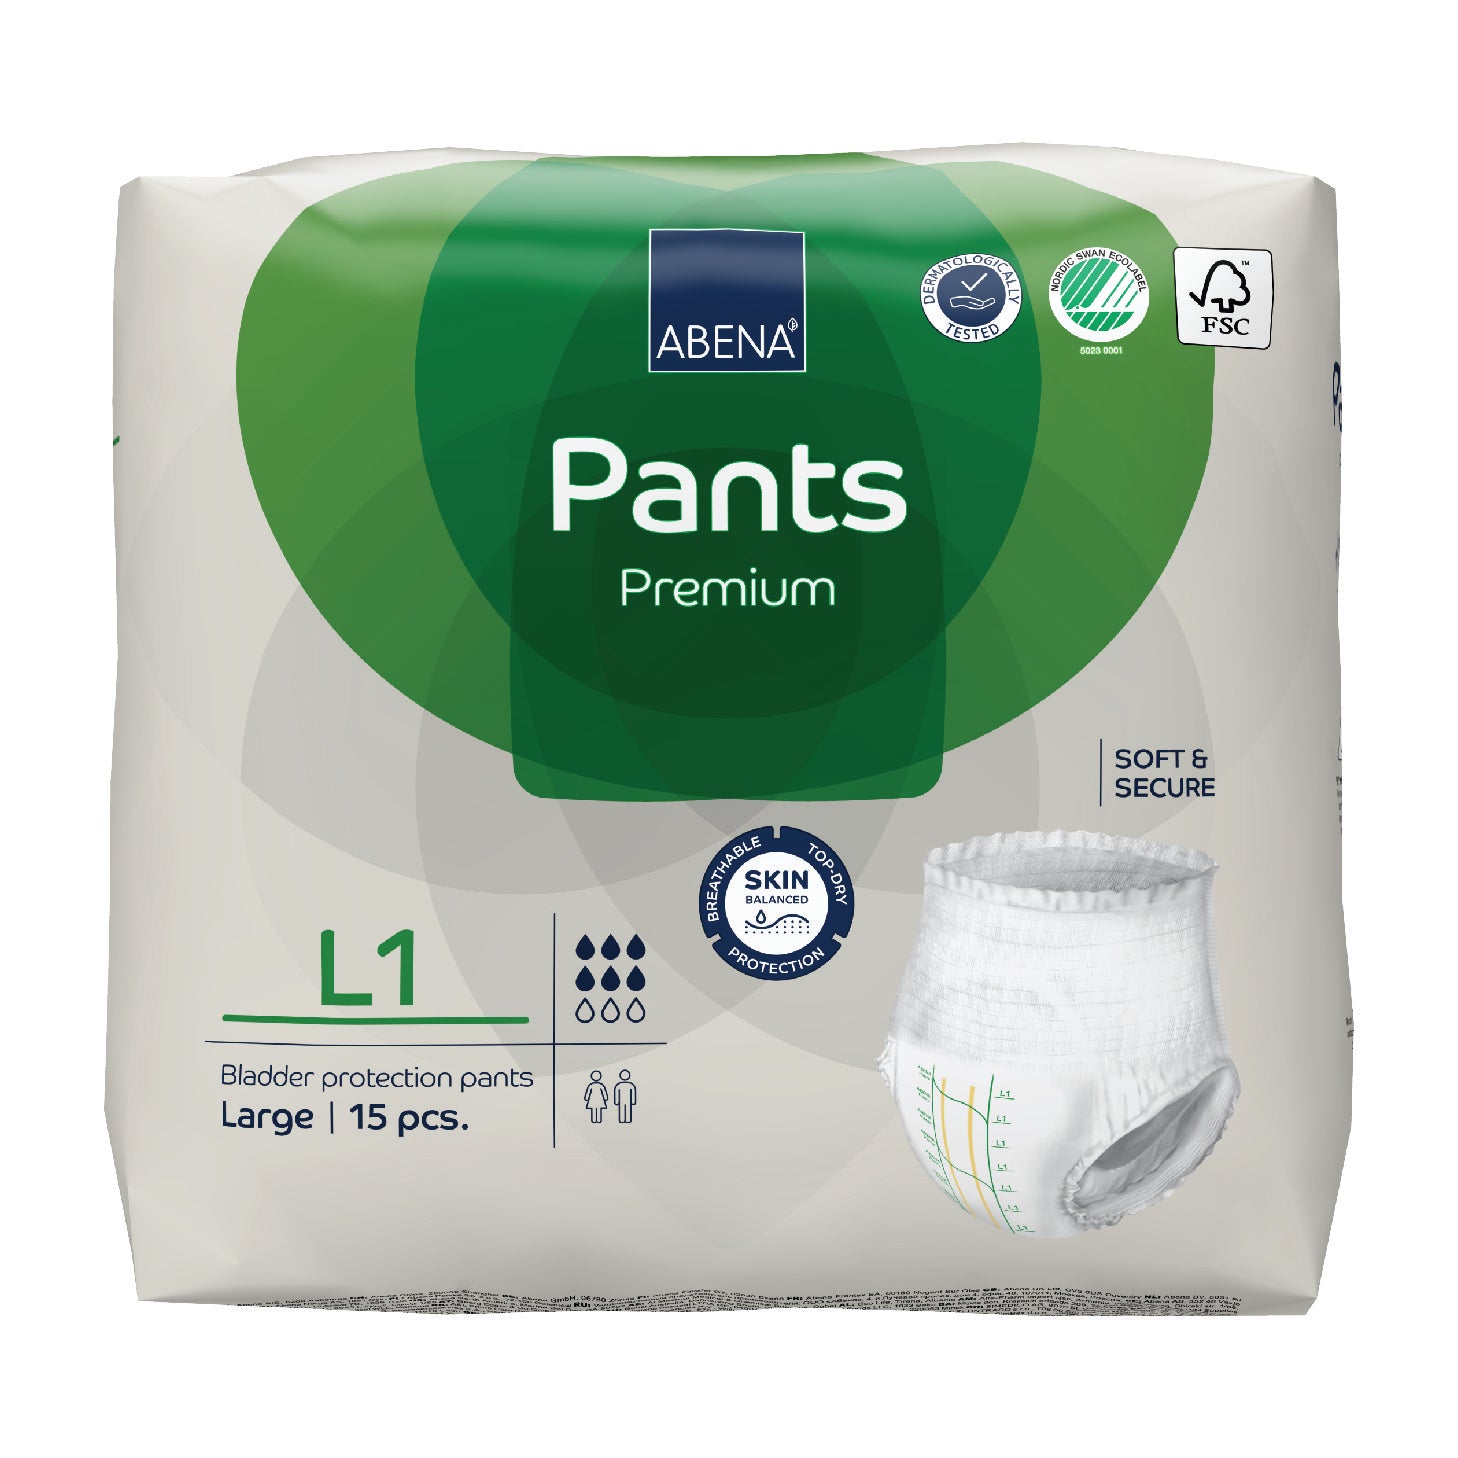 pampers 4 147 szt